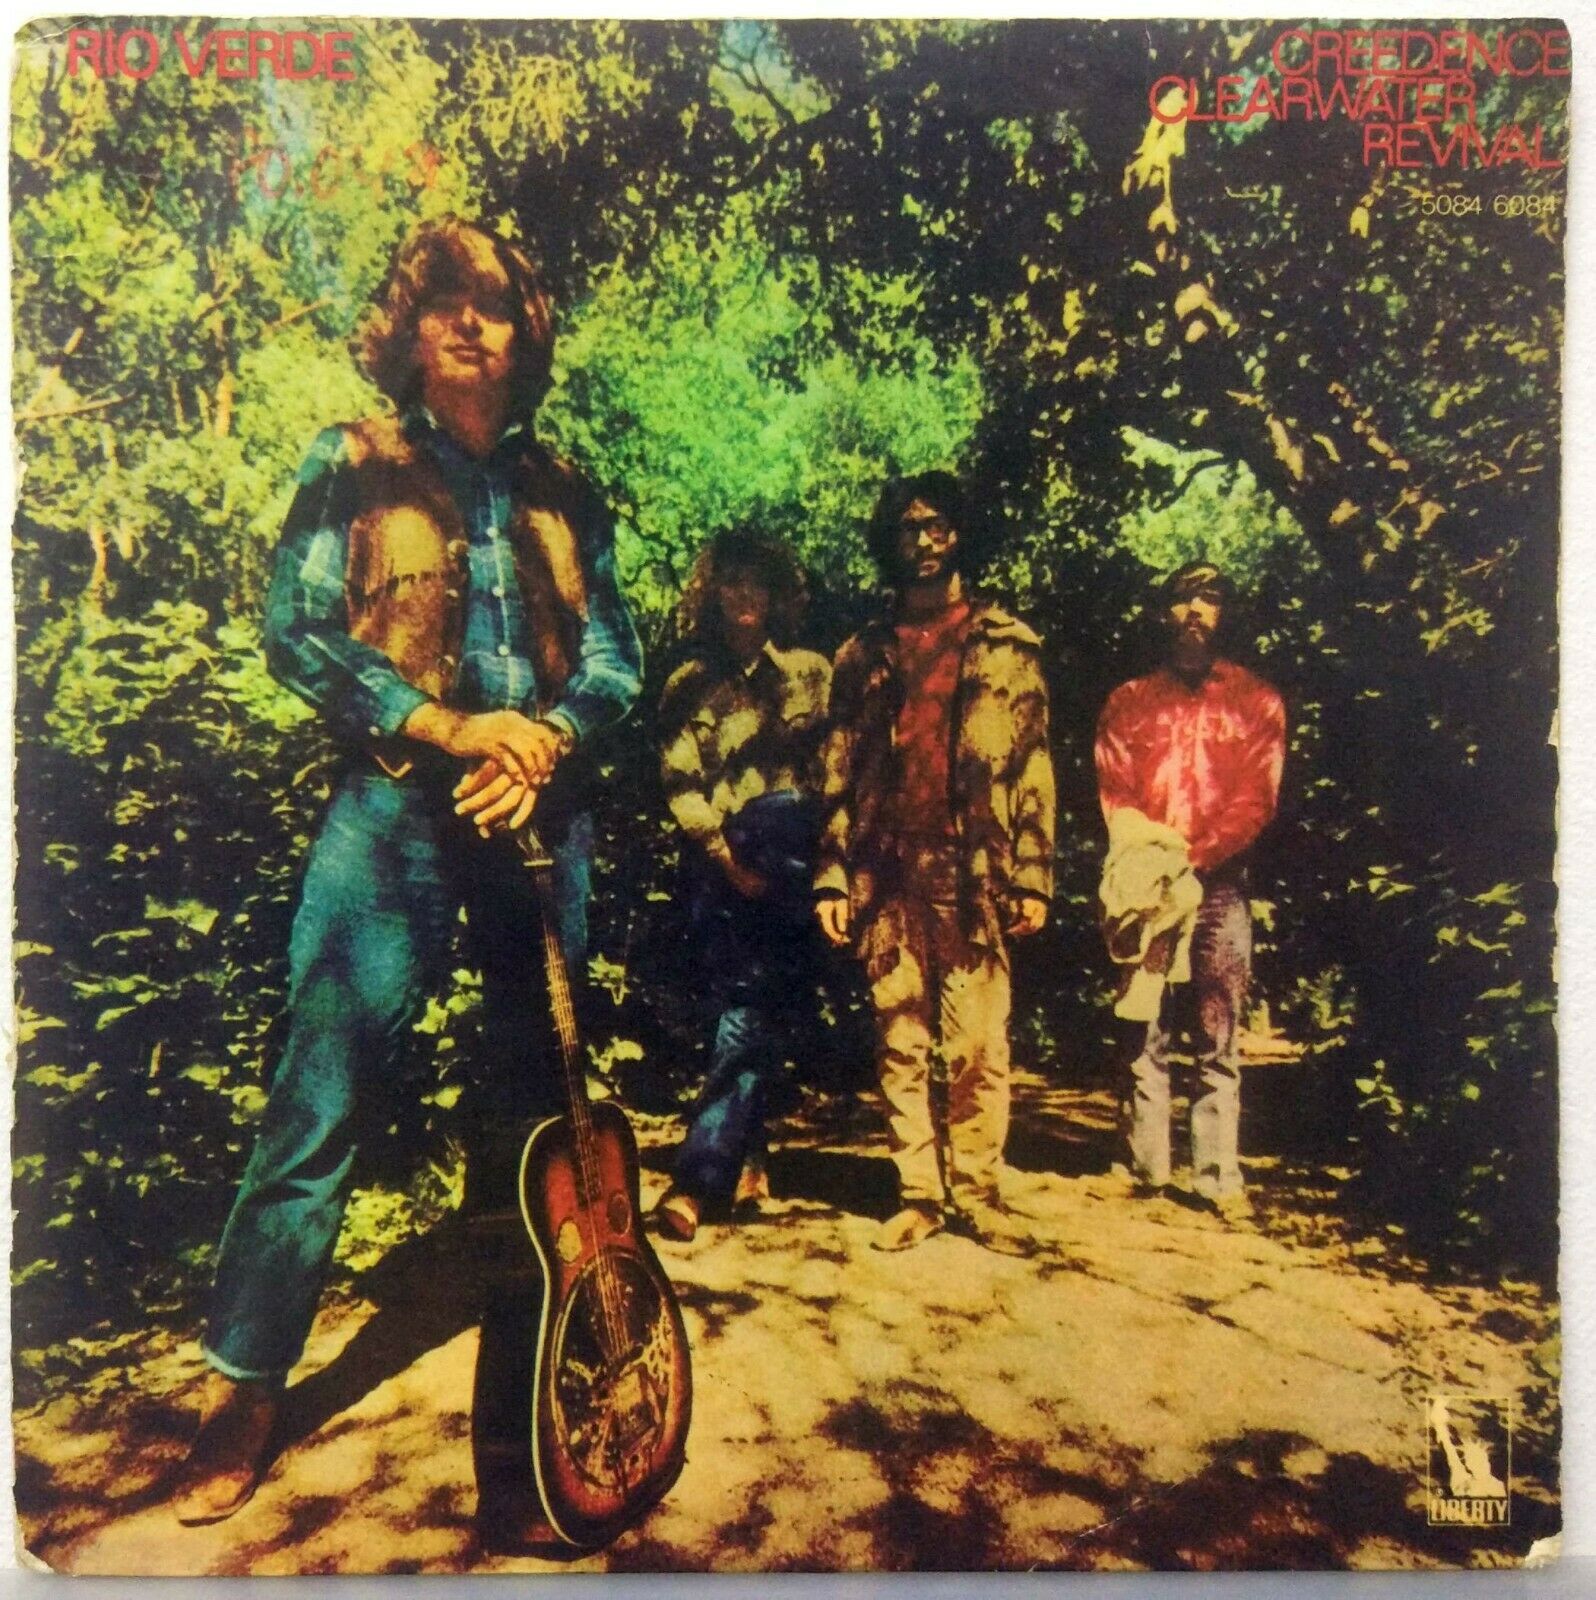 Creedence Clearwater Revival – Green River – Rio Verde LP Rare Argentina press